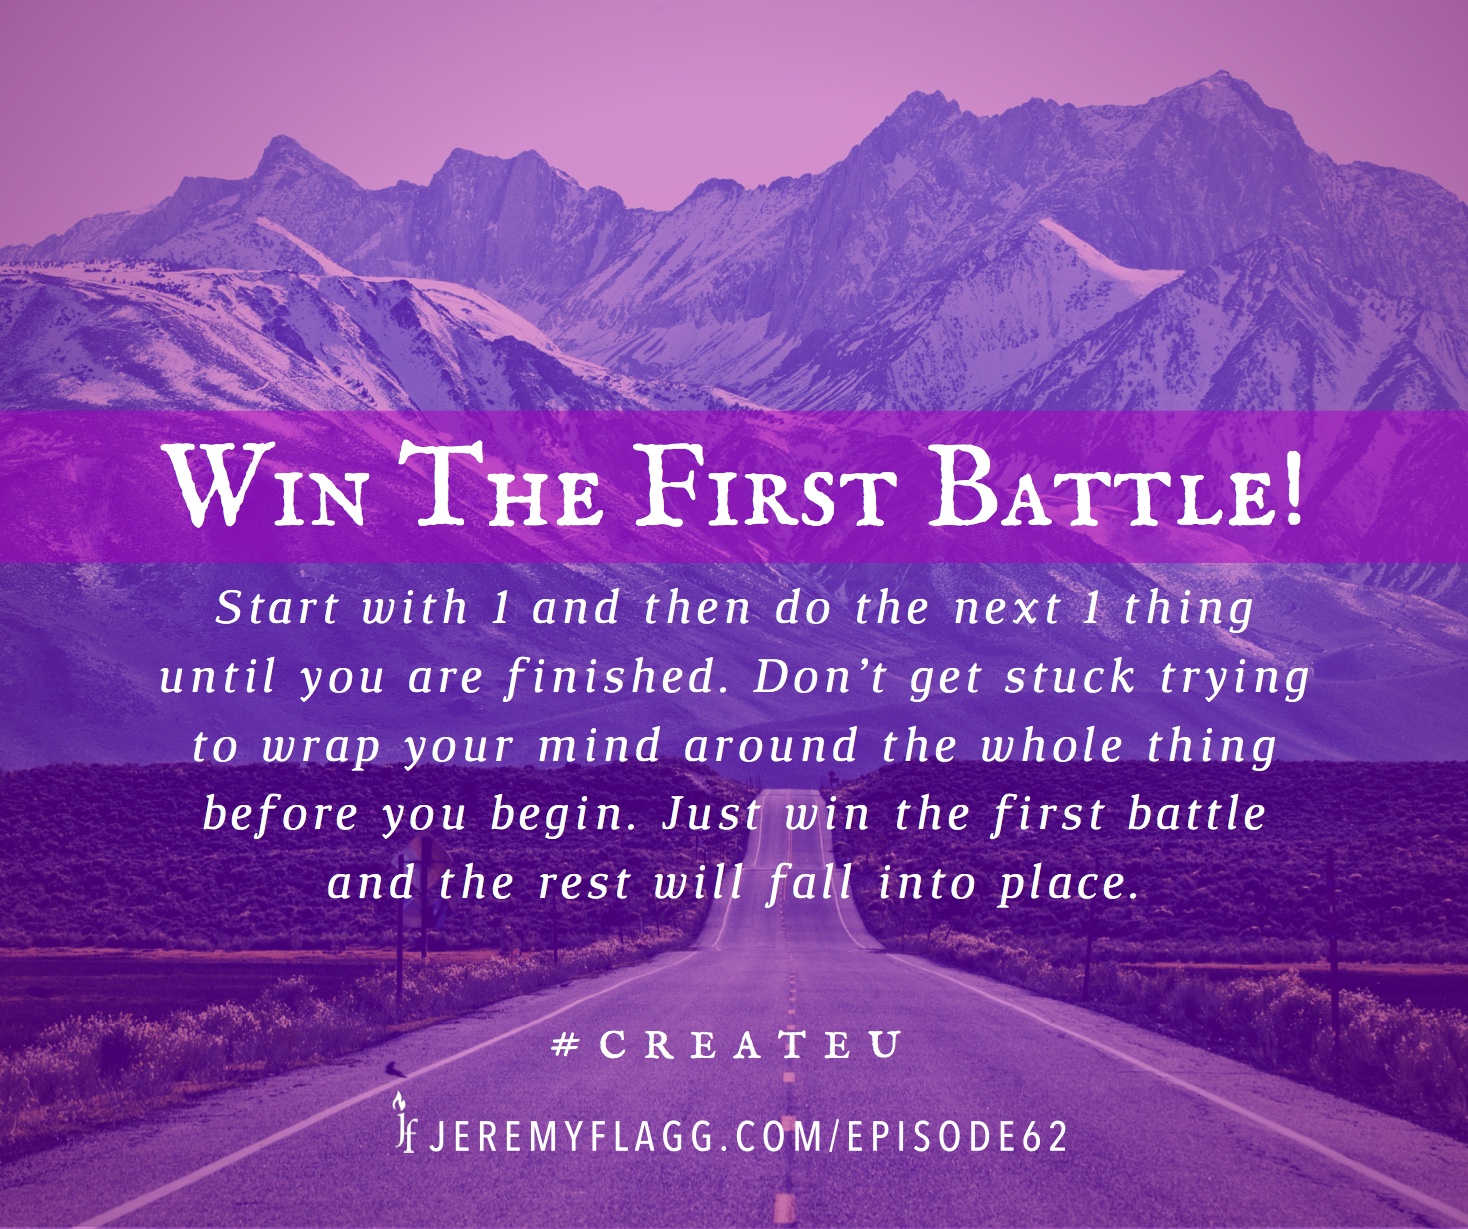 Win-The-First-Battle-quote-Jeremy-Flagg-FB